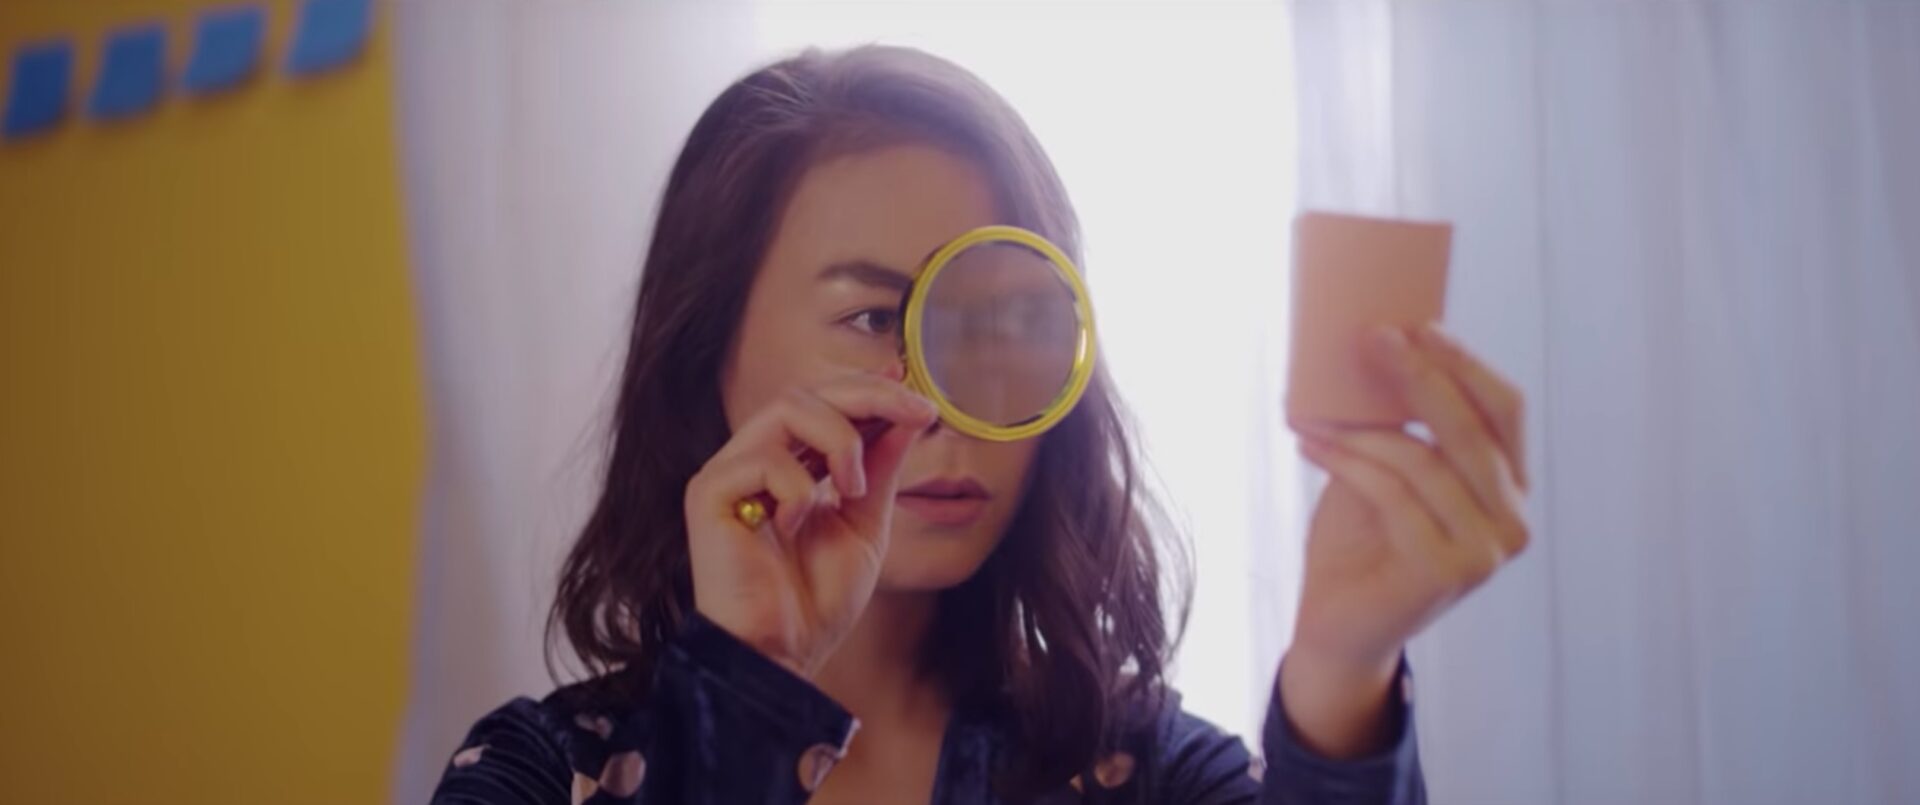 Mitski is all alone for new single “Nobody,” accompanying music video